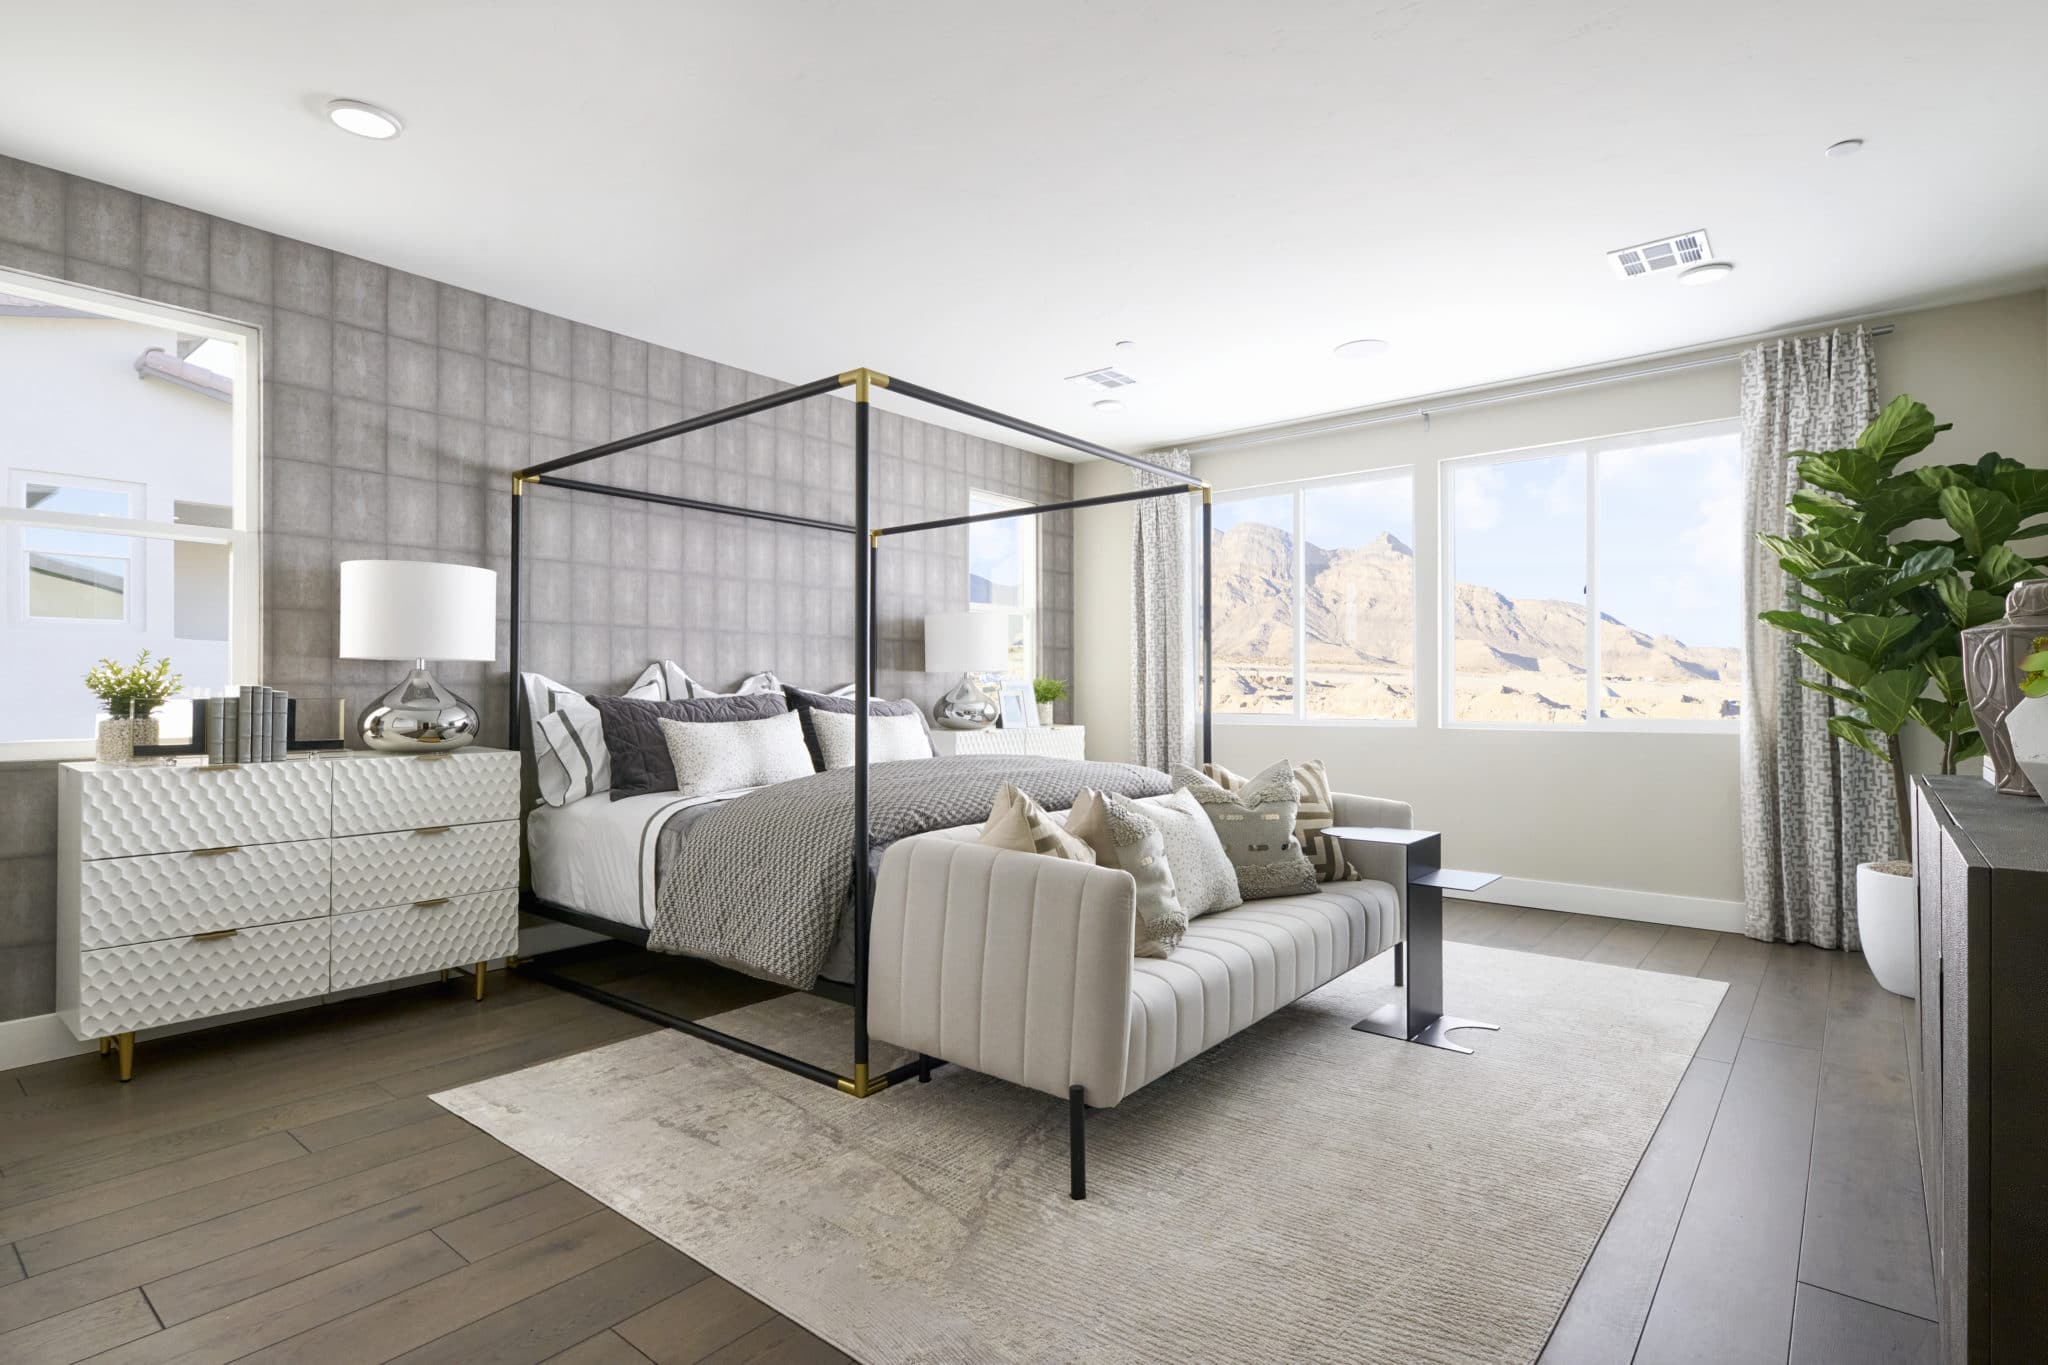 Primary Bedroom of Plan 4 at Kings Canyon by Tri Pointe Homes